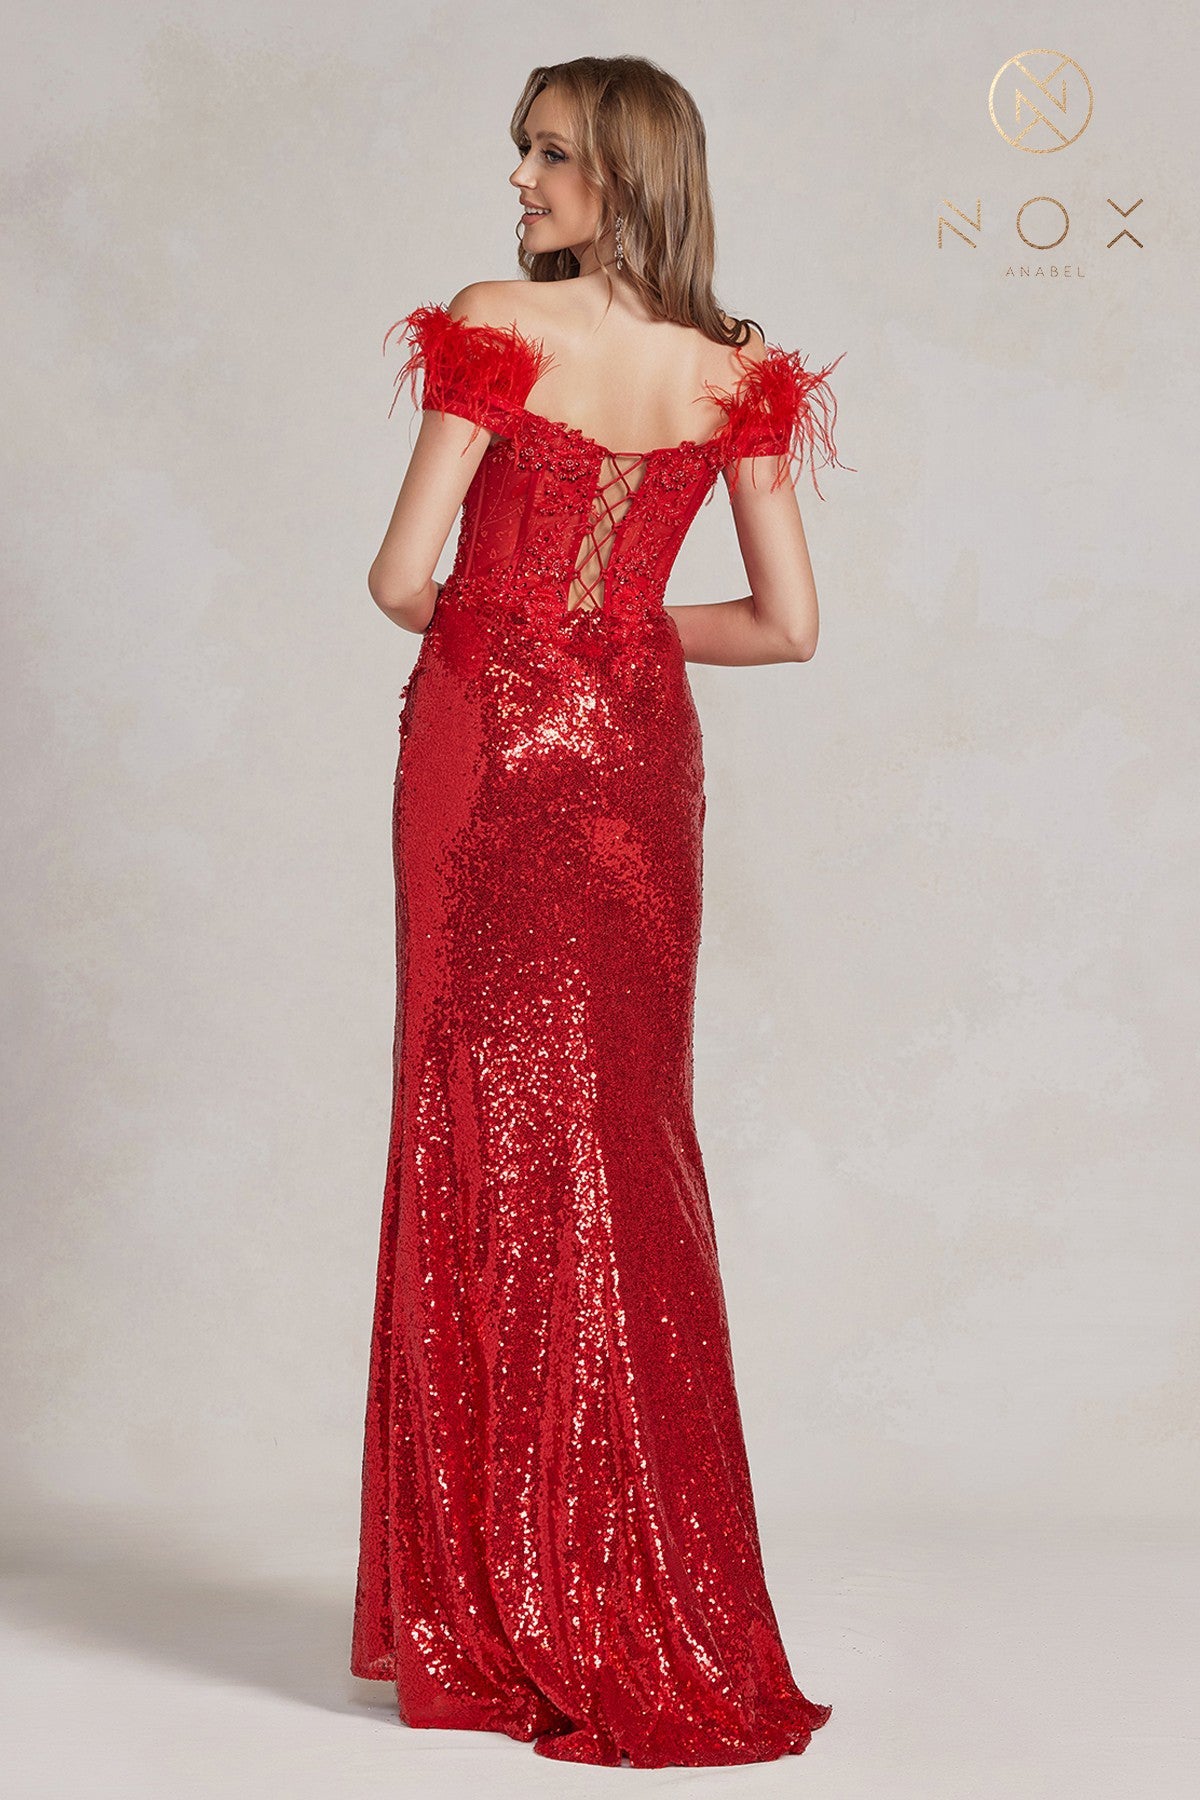 Nox Anabel S1229 Size 10 Red Long Sequin Maxi Slit Lace Sheer Corset off the Shoulder Feather Dress Prom